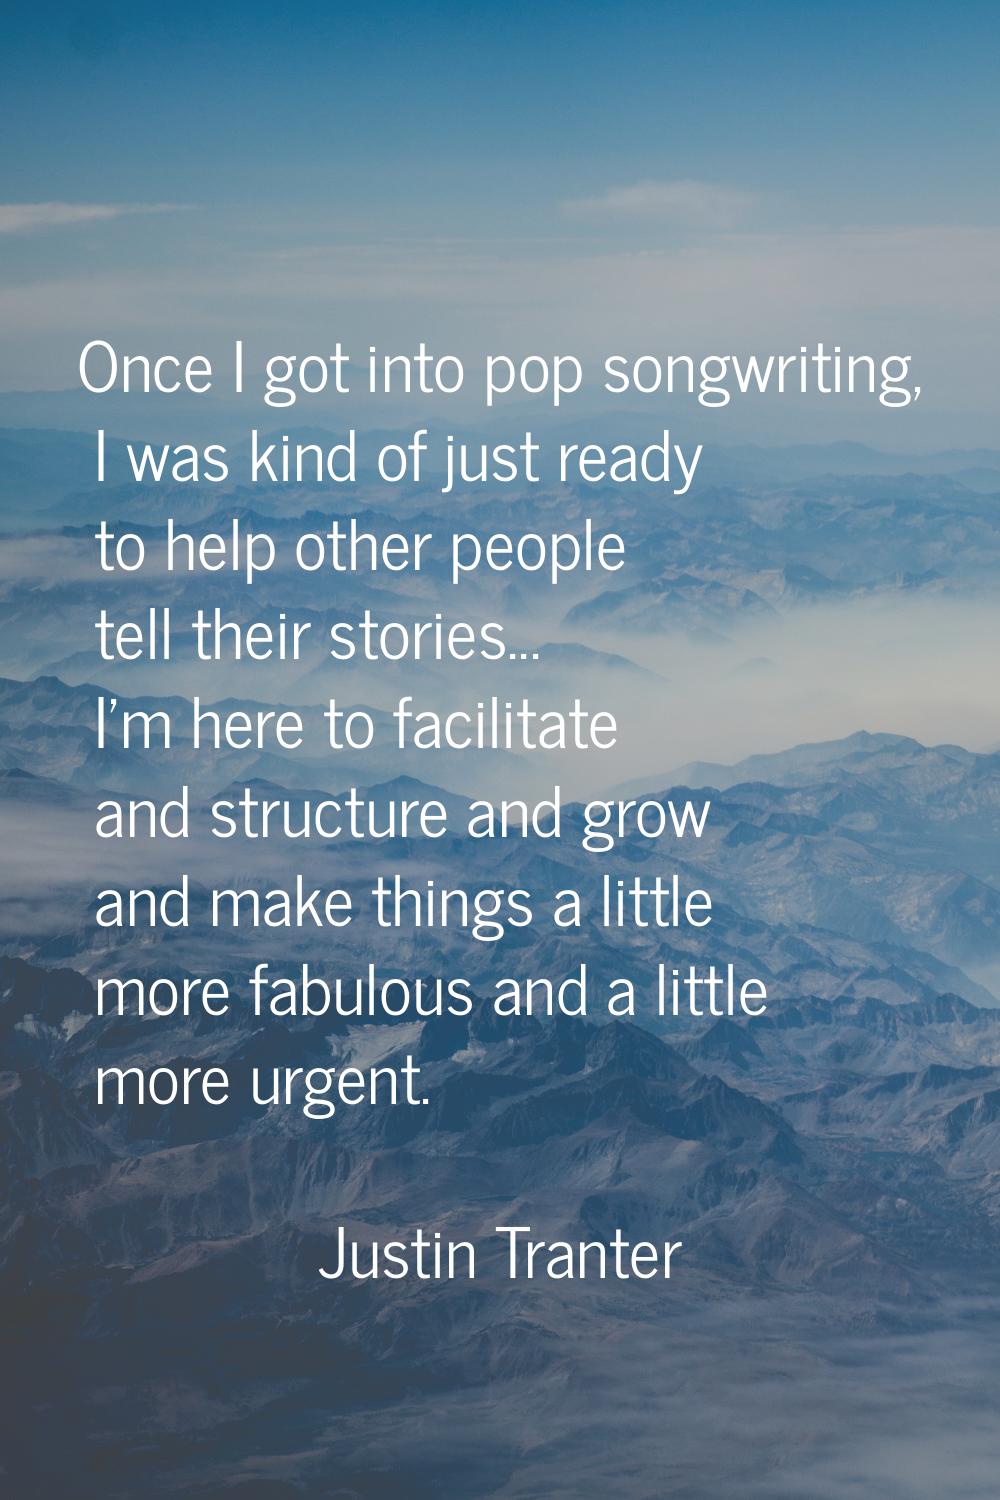 Once I got into pop songwriting, I was kind of just ready to help other people tell their stories..